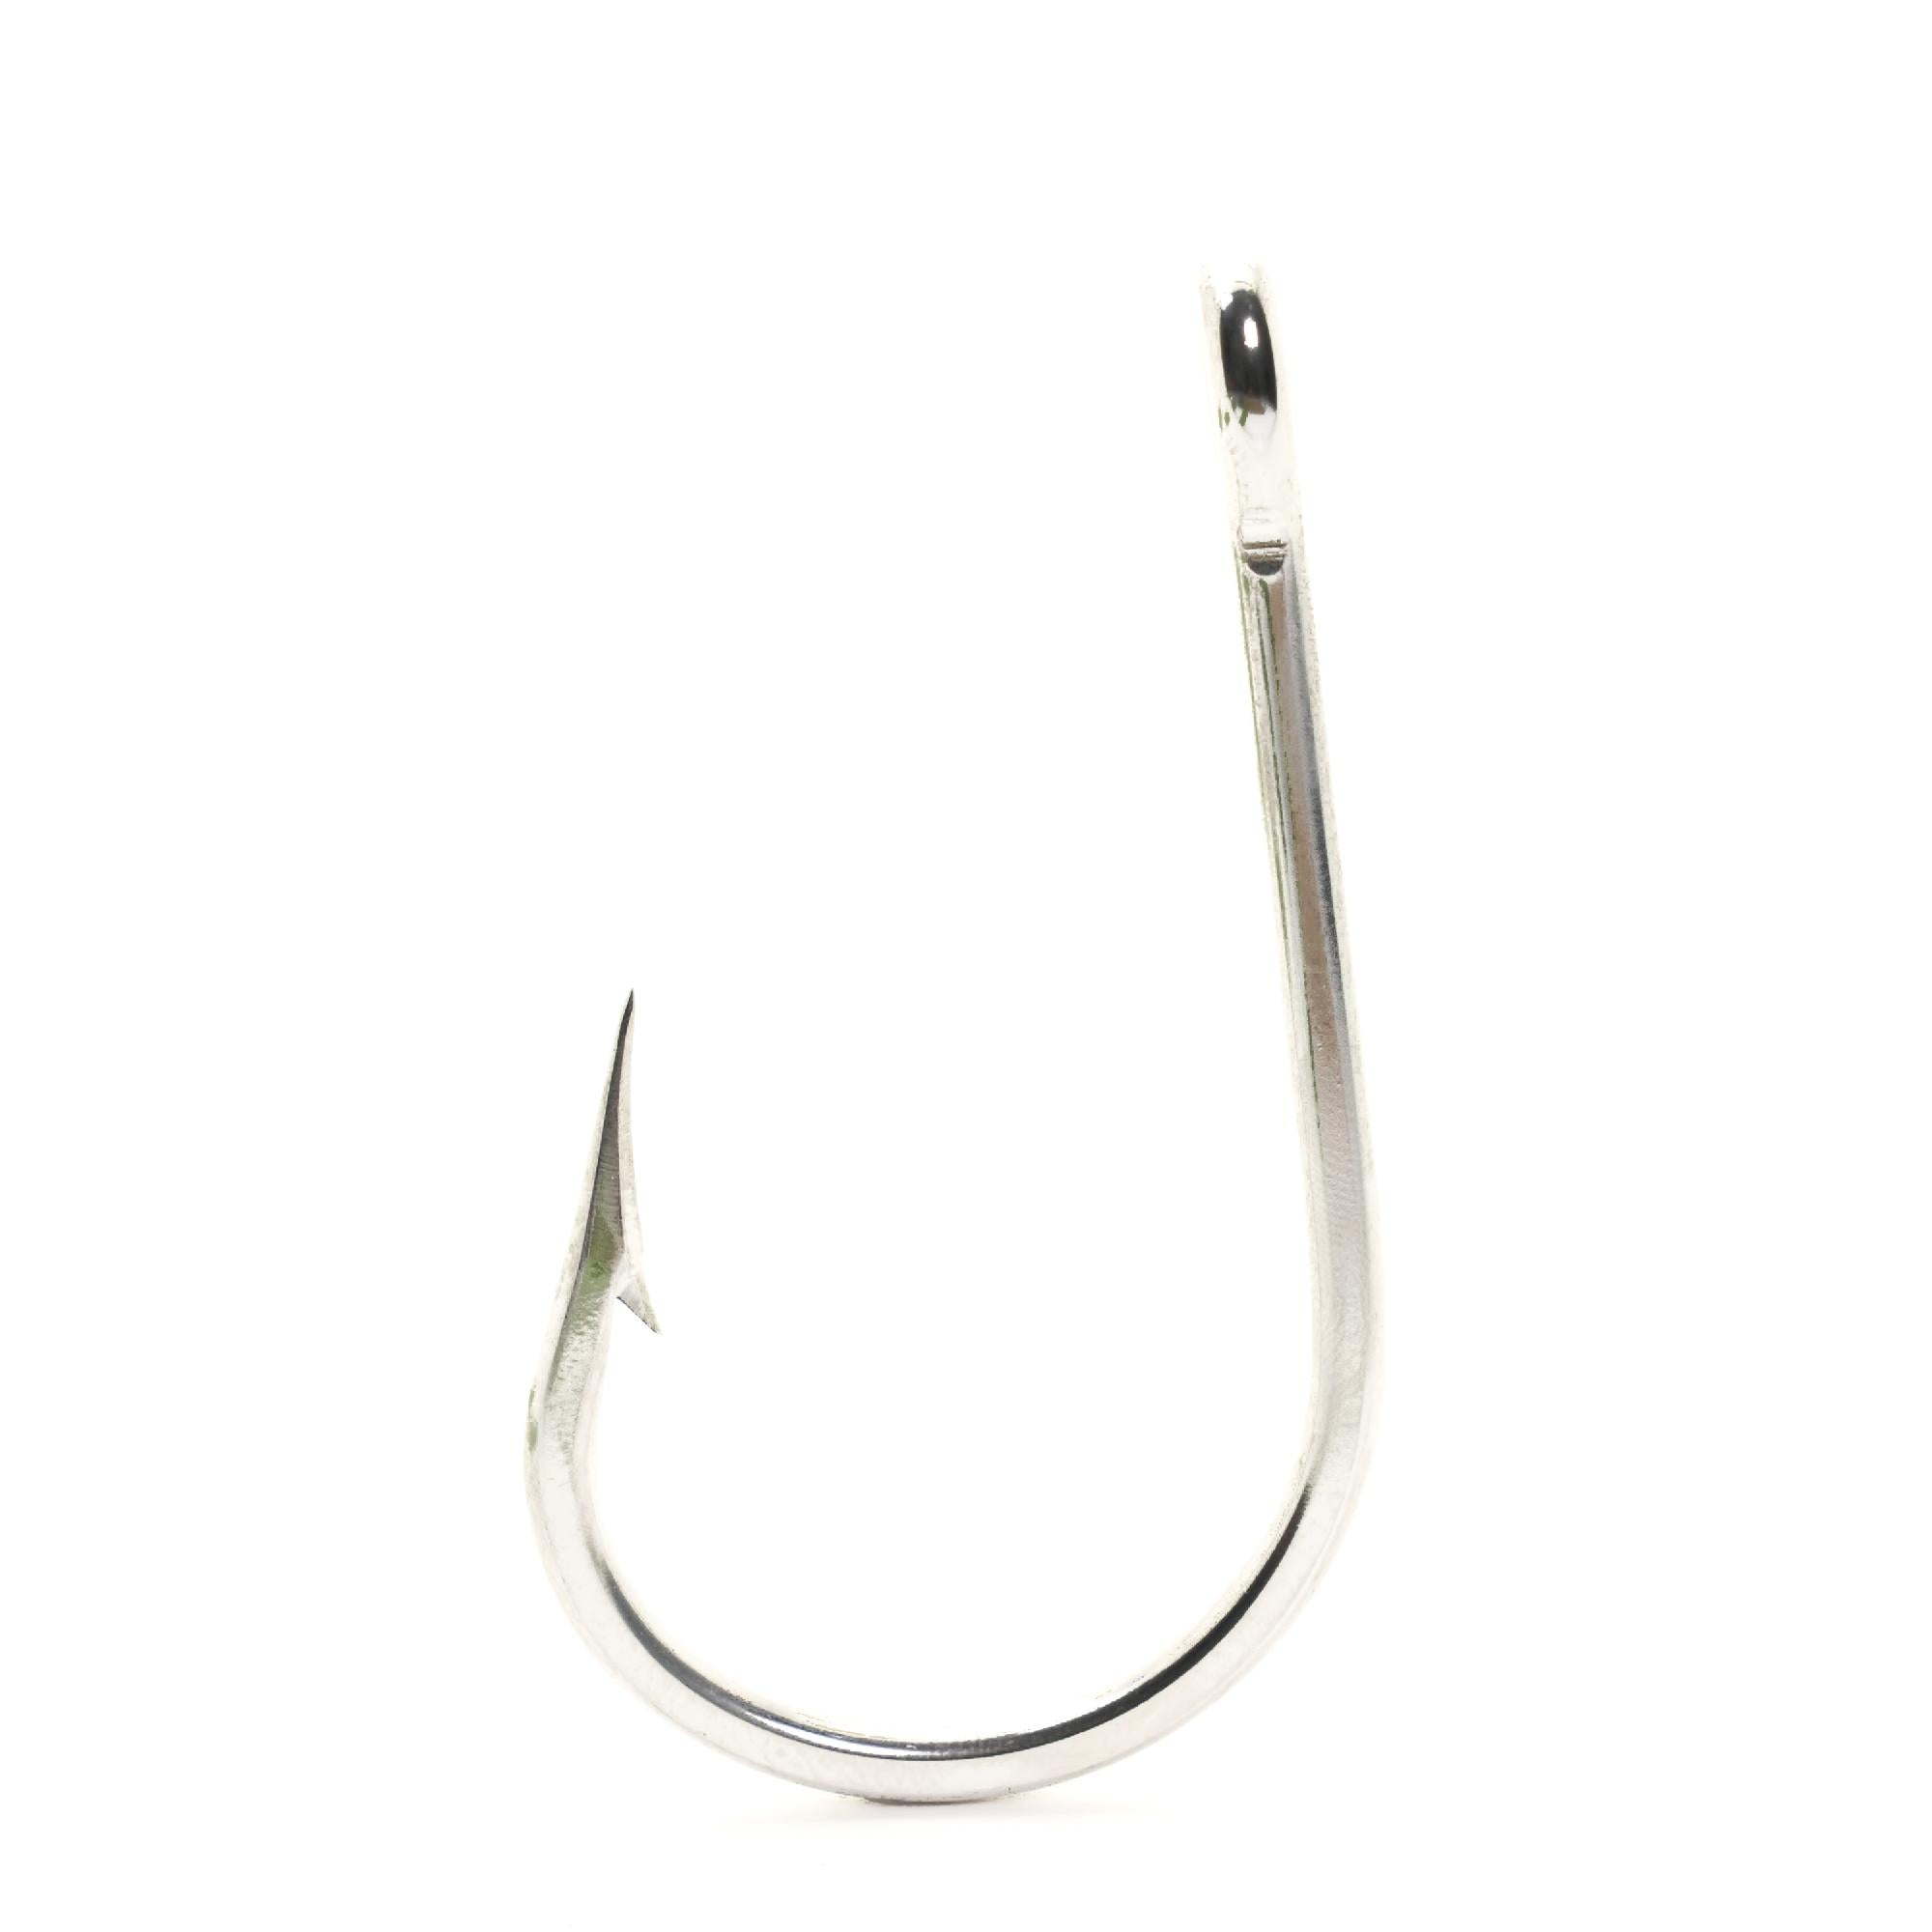 Southern & Tuna Big Game Hook - 6/0 / Stainless Steel / 2